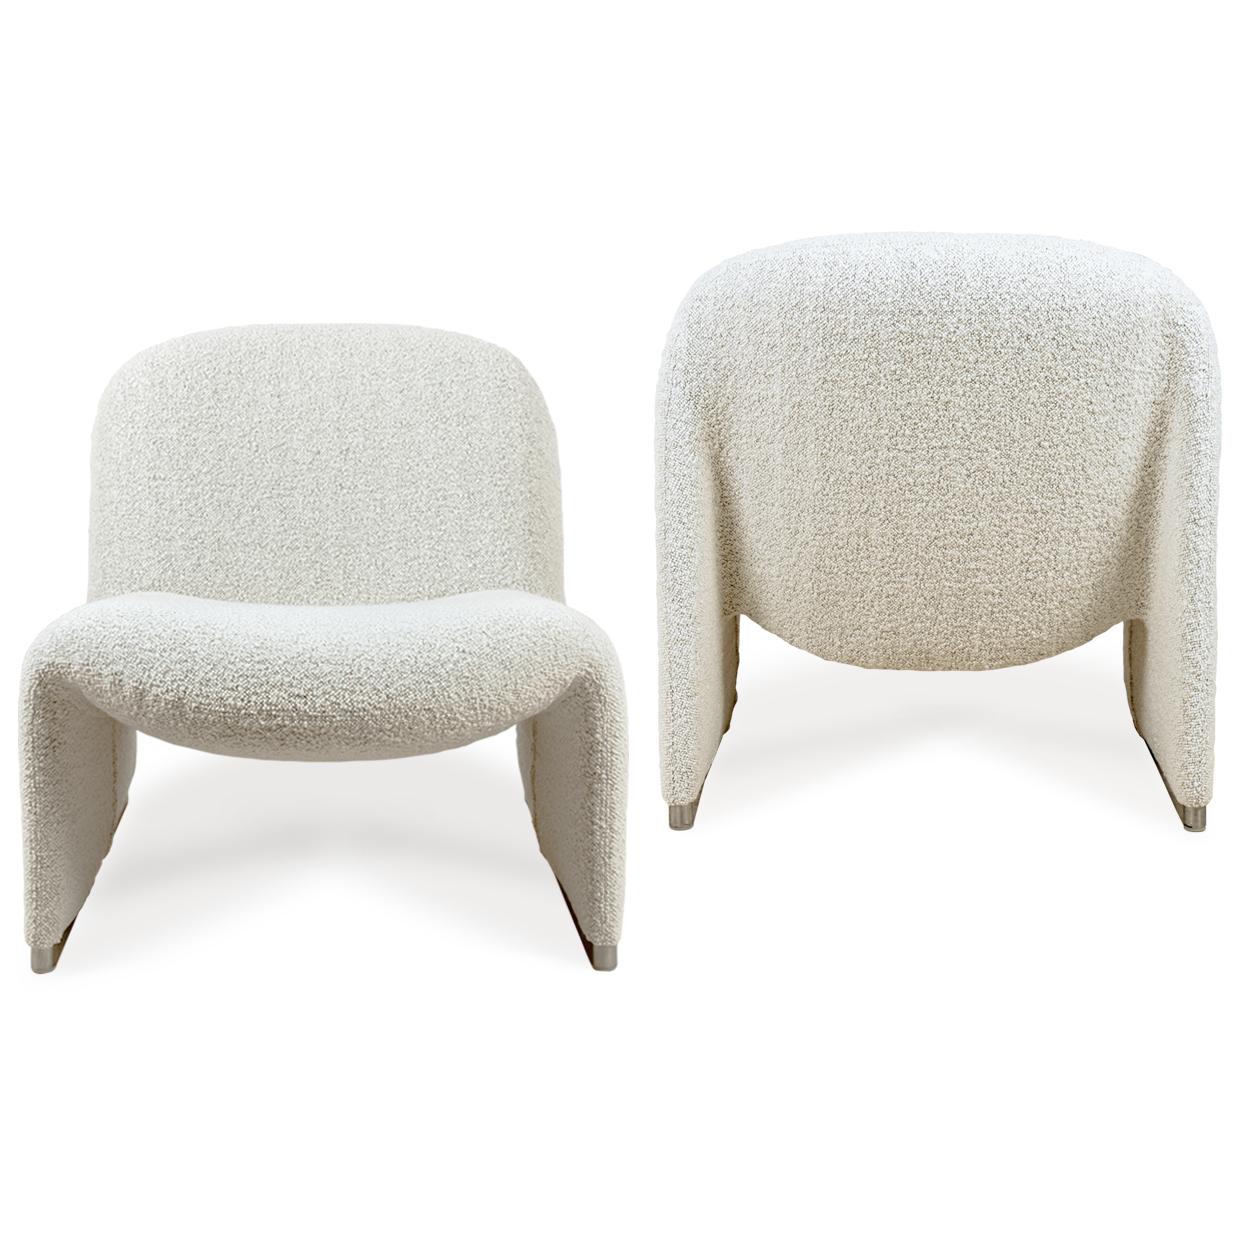 Metal Pair of “Alky” Chairs, Castelli with Dedar New Upholstery Boucle